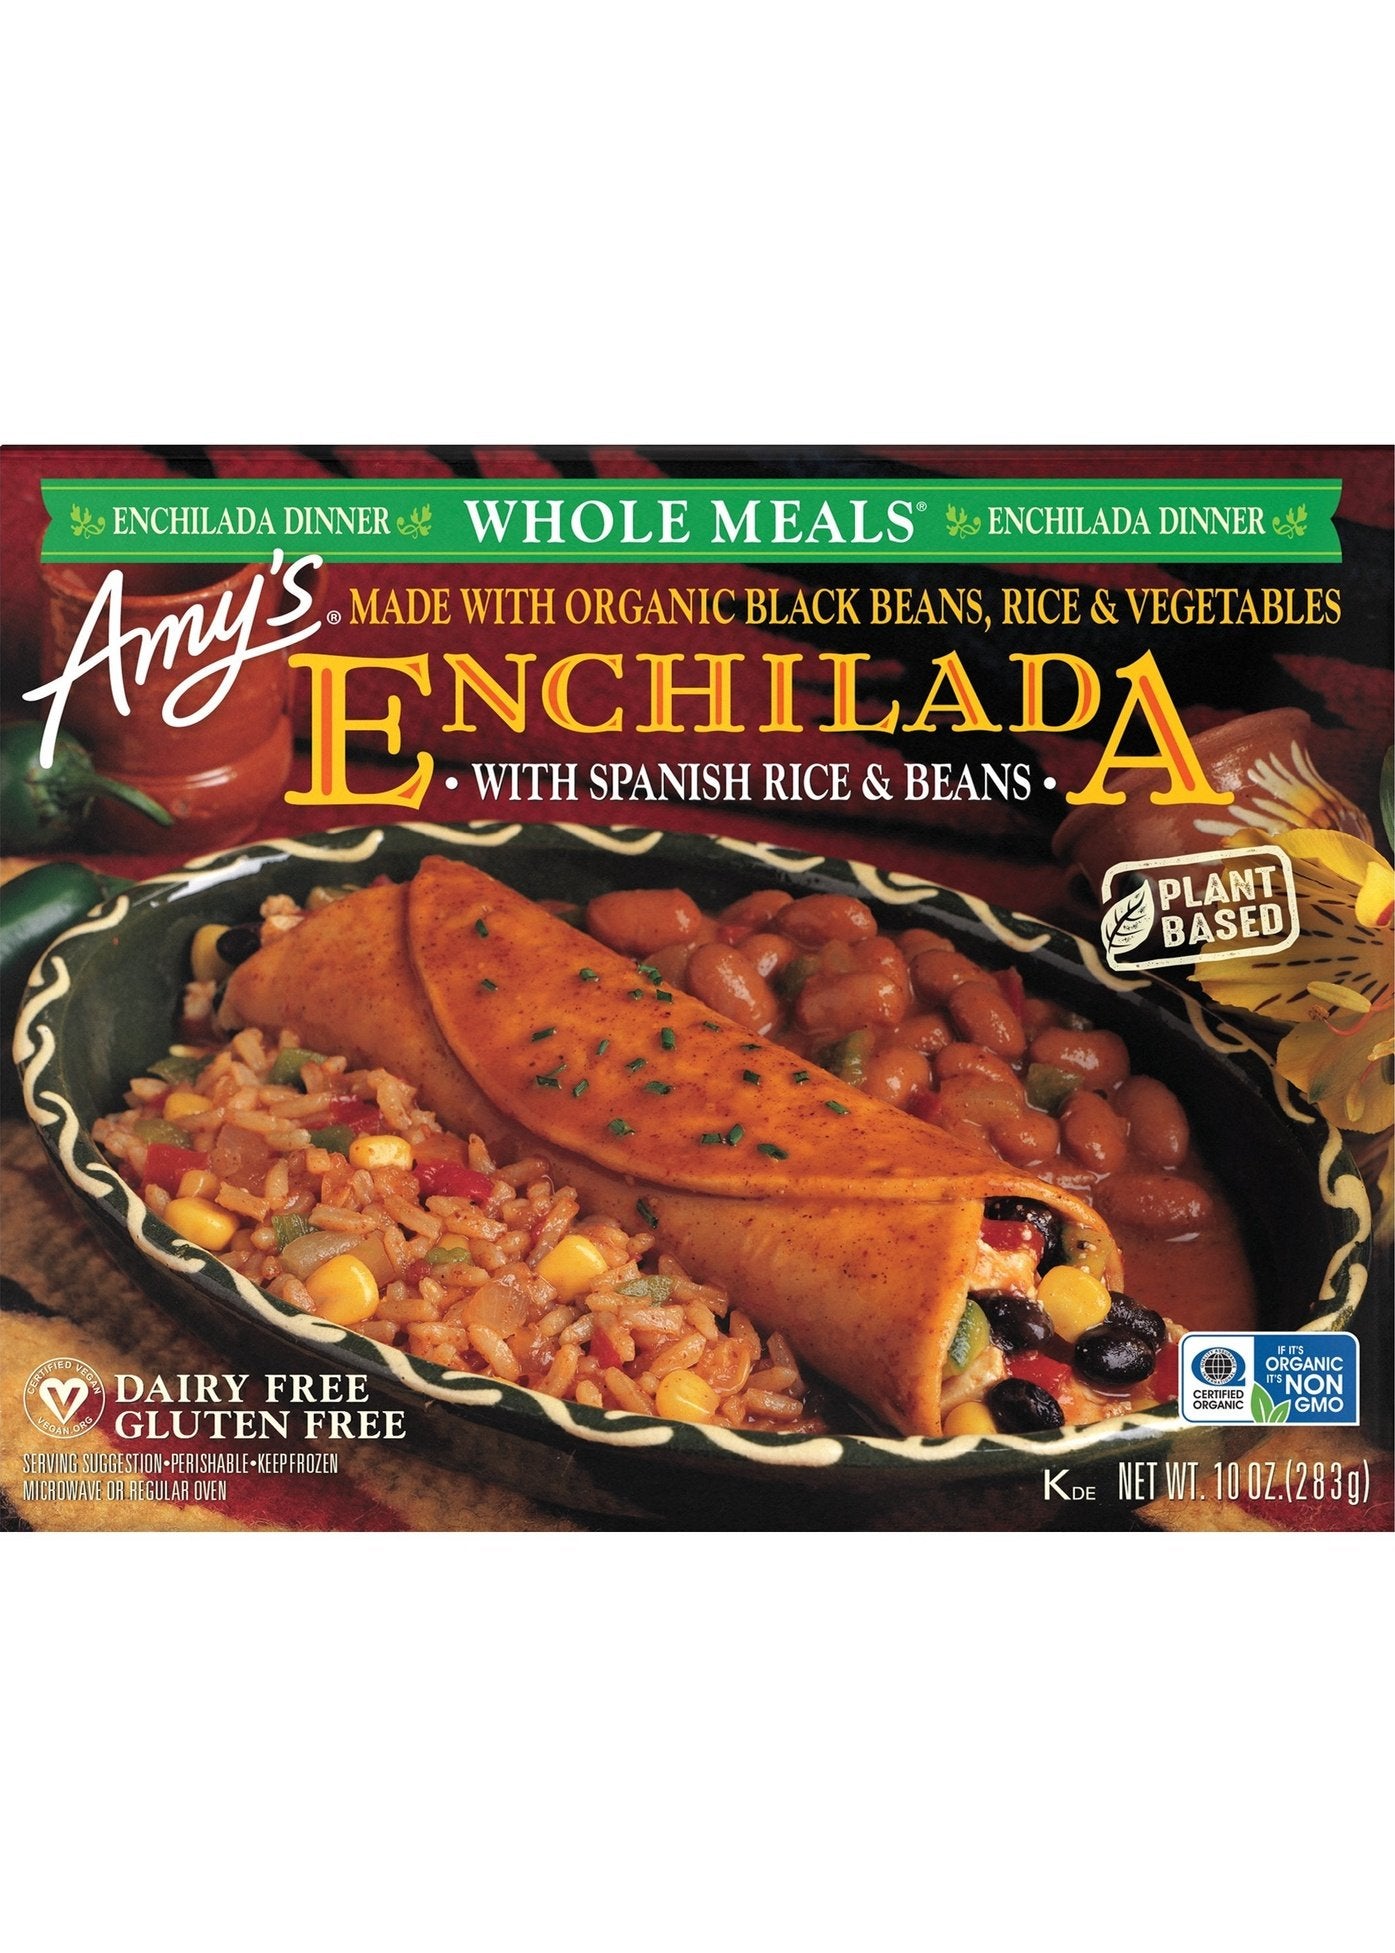 AMY'S Enchilada with Spanish Rice & Beans Meal